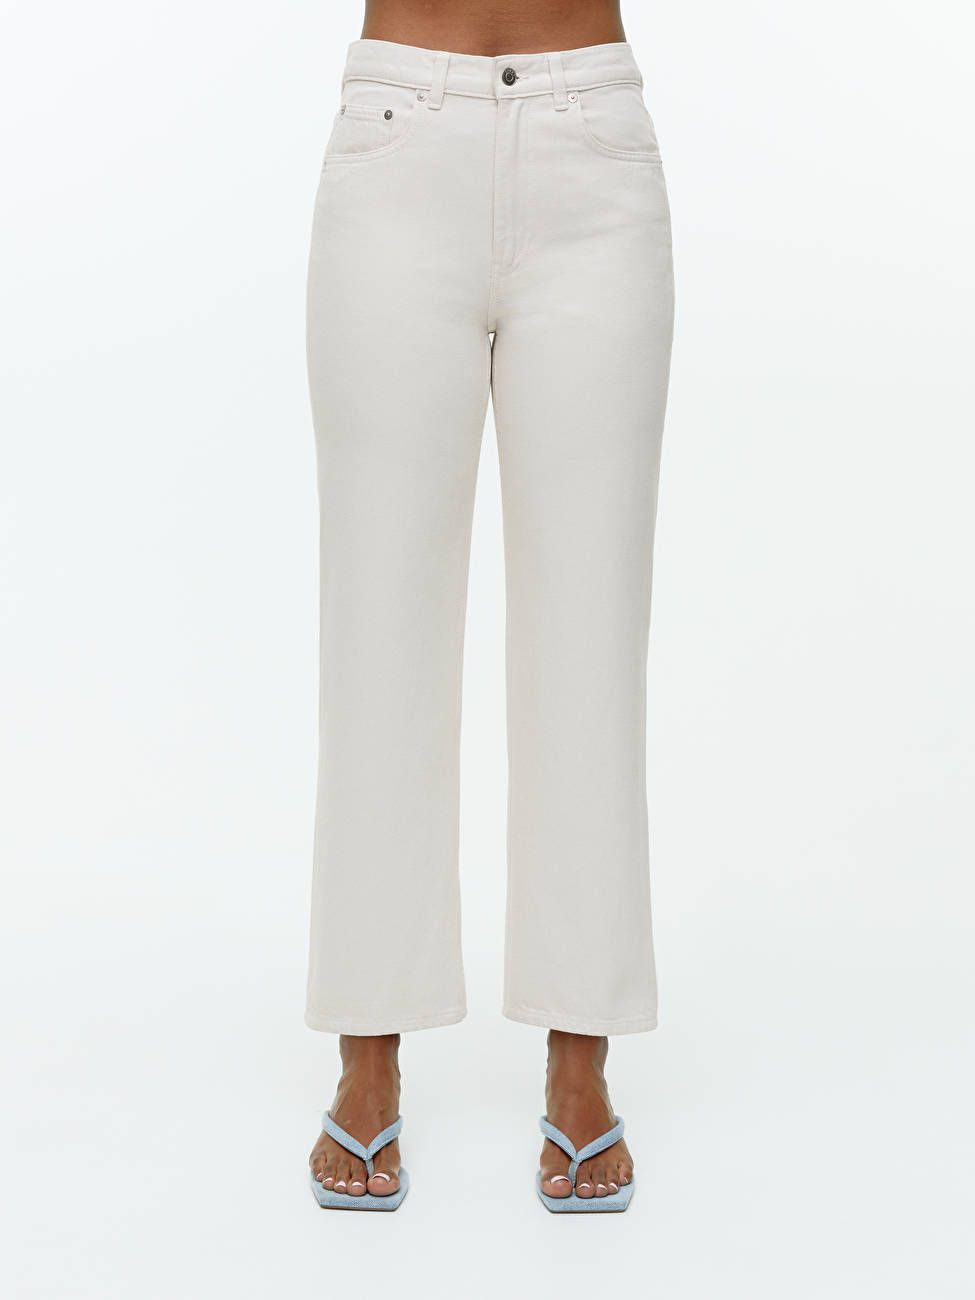 ROSE CROPPED Straight Jeans | ARKET